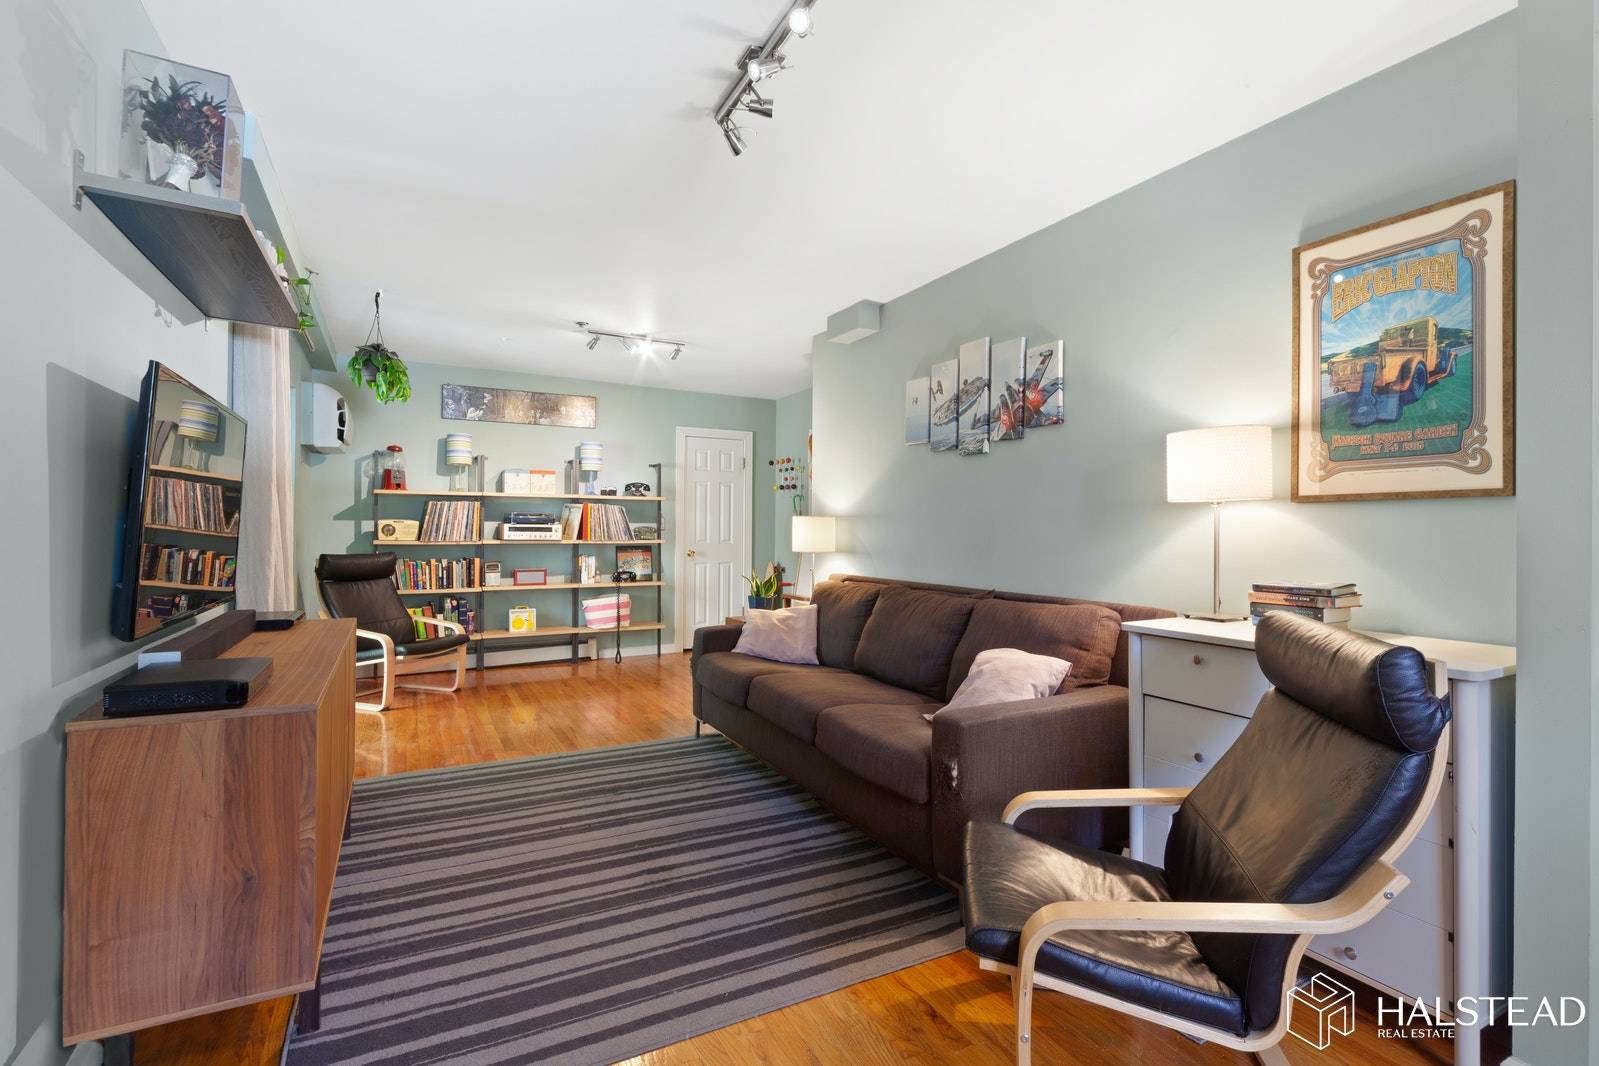 This bright and airy 2BR 2BA condominium with deeded parking and two private outdoor spaces is ideally located between mellow South Slope and vibrant Greenwood Heights.